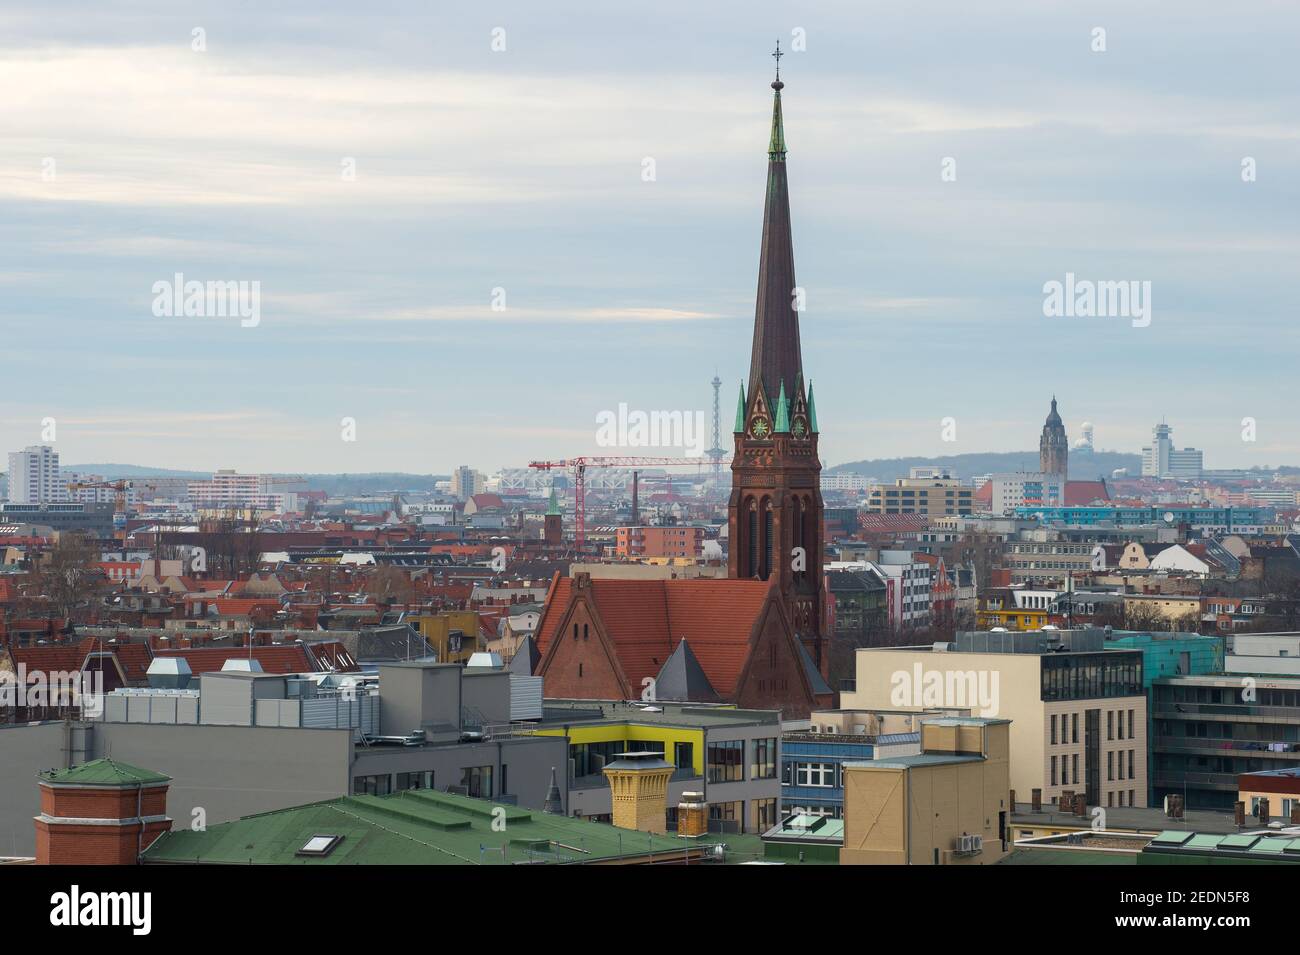 07.02.2019, Berlin, , Germany - Mitte - Overview of Berlin with Heilandskirche, Charlottenburg-Wilmersdorf district office, RBB radio station on Masur Stock Photo